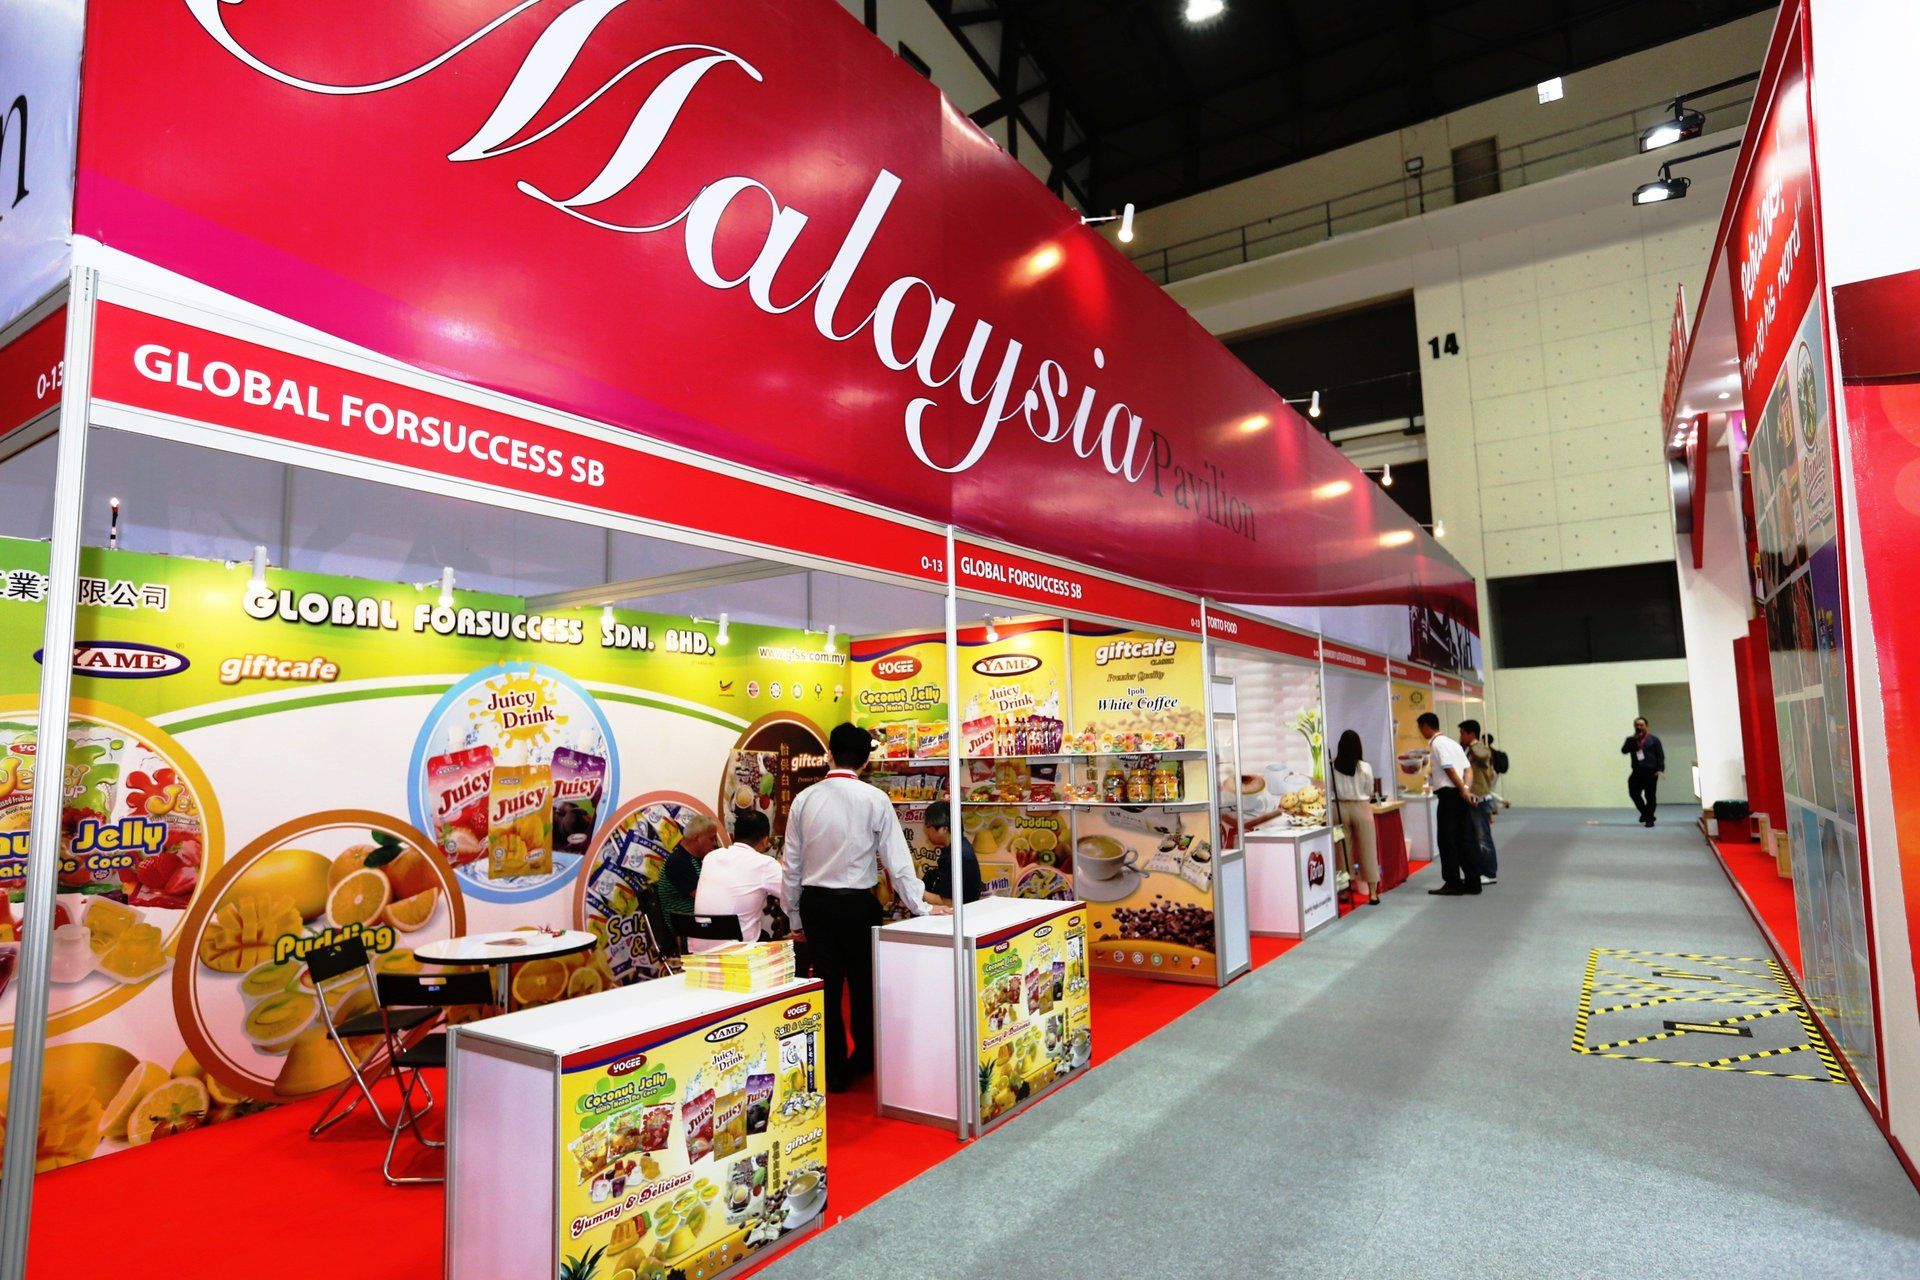 Malaysia Pavilion @ Thaifex 2017. Booth designed and built by Essential Global Fairs.